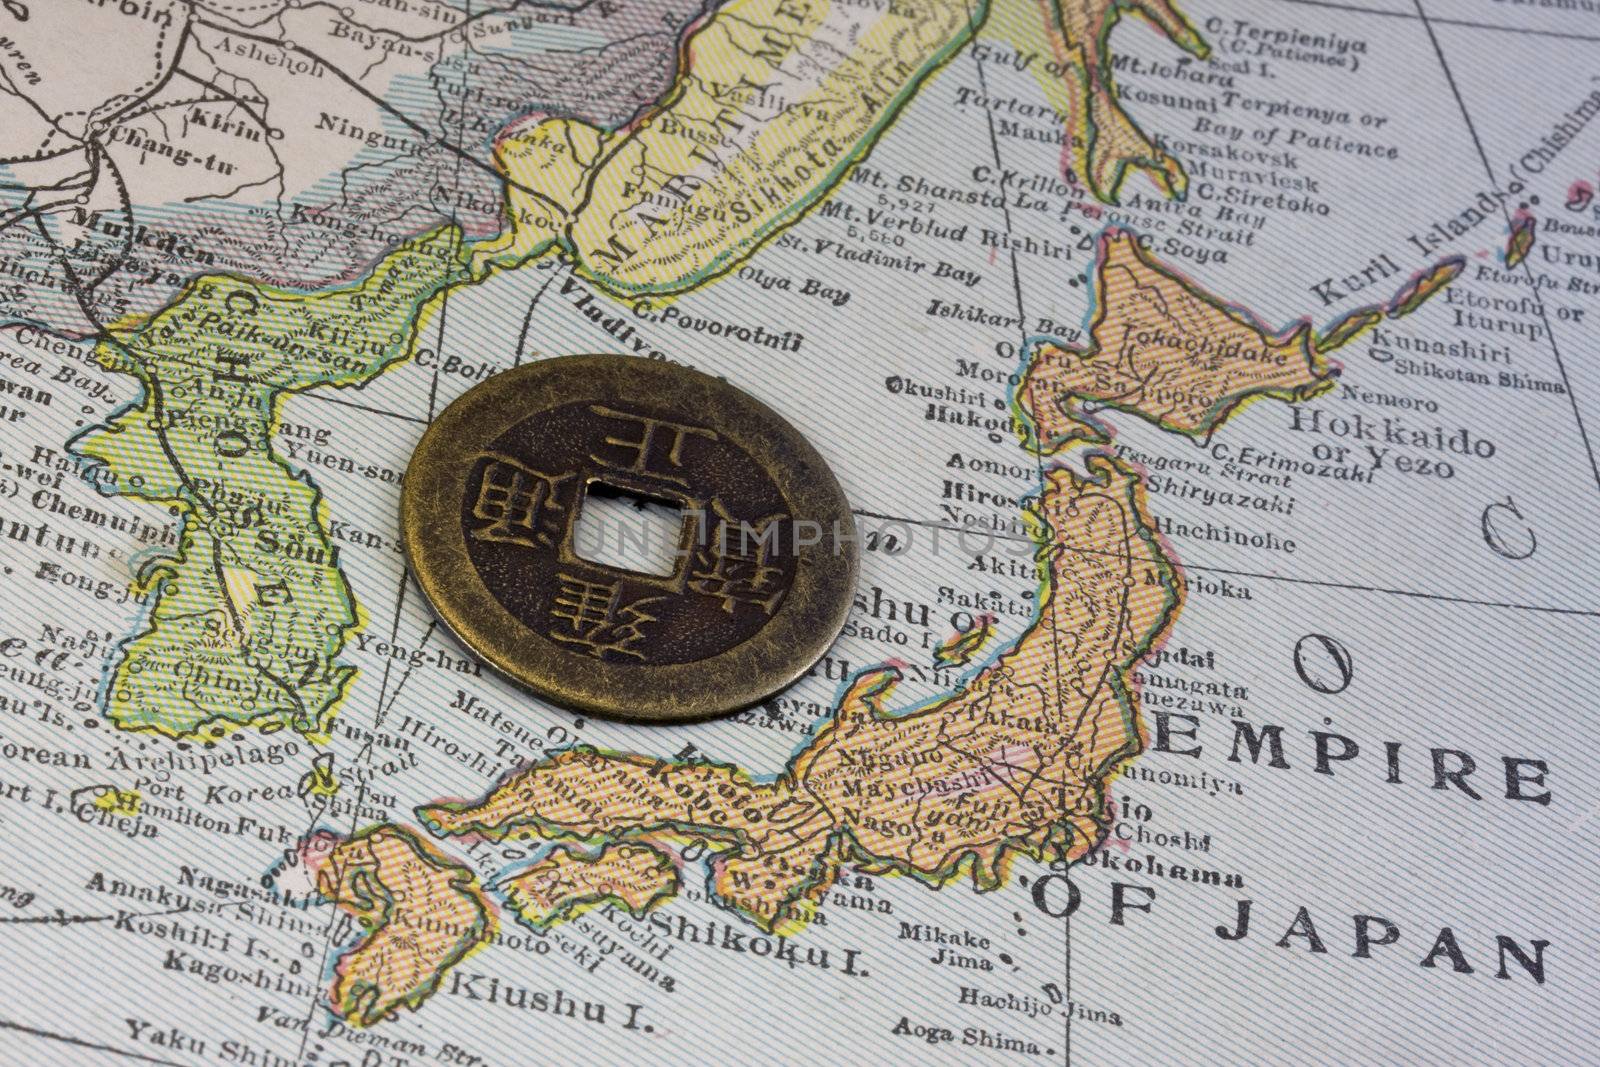 Japan on vintage map and old coin by PixelsAway